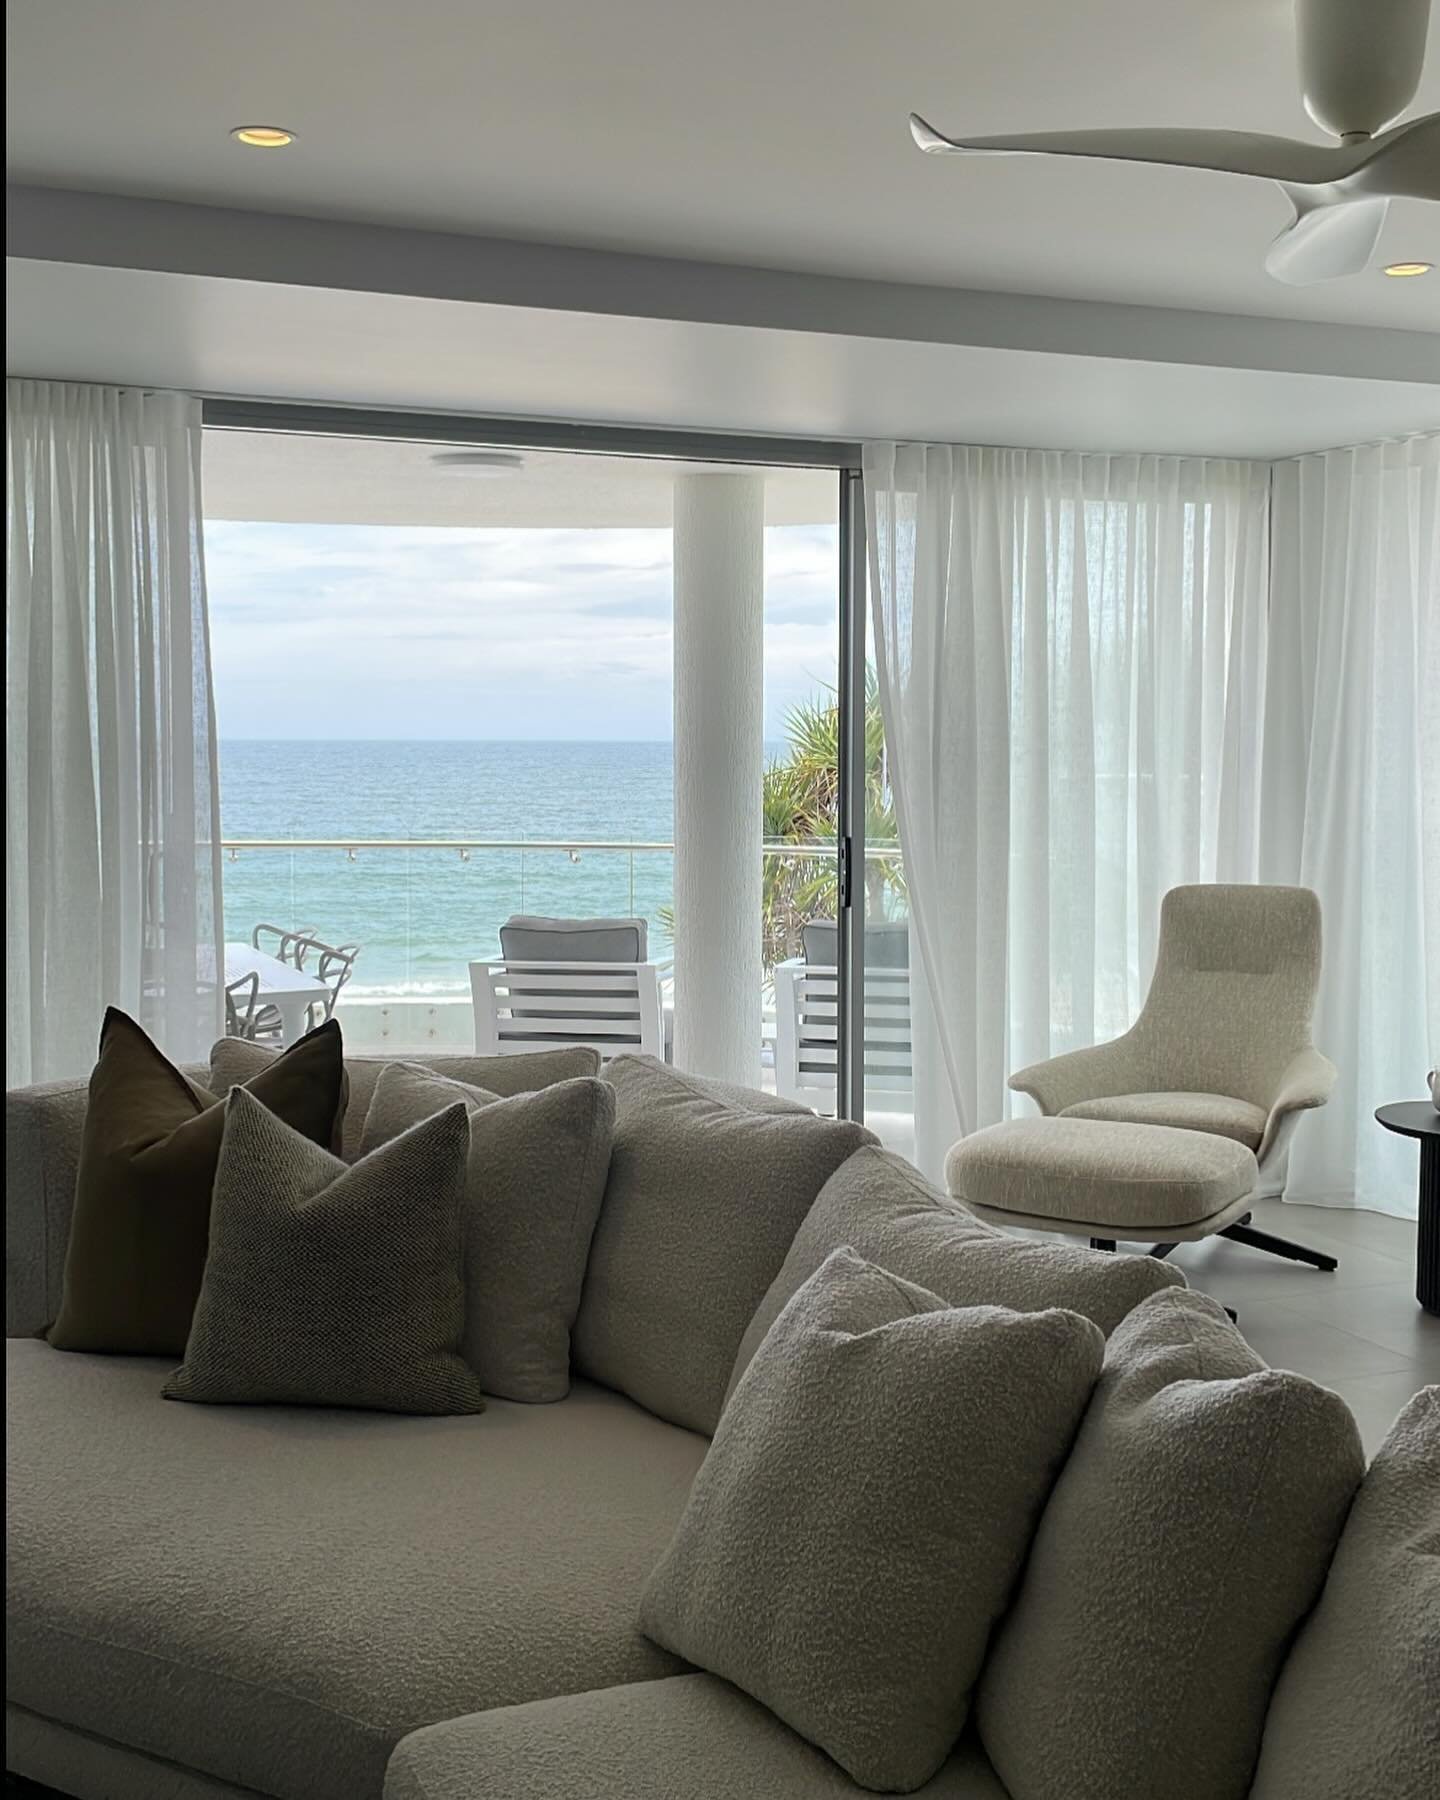 Soft White Wave Sheers in this luxurious apartment renovation right on Noosa Beach &hellip;.. just perfect 🤍✨

Curtains are in my favourite @unique_fabrics Stellar, a soft textured polyester weave, available in 7 beautiful shades, it&rsquo;s just di